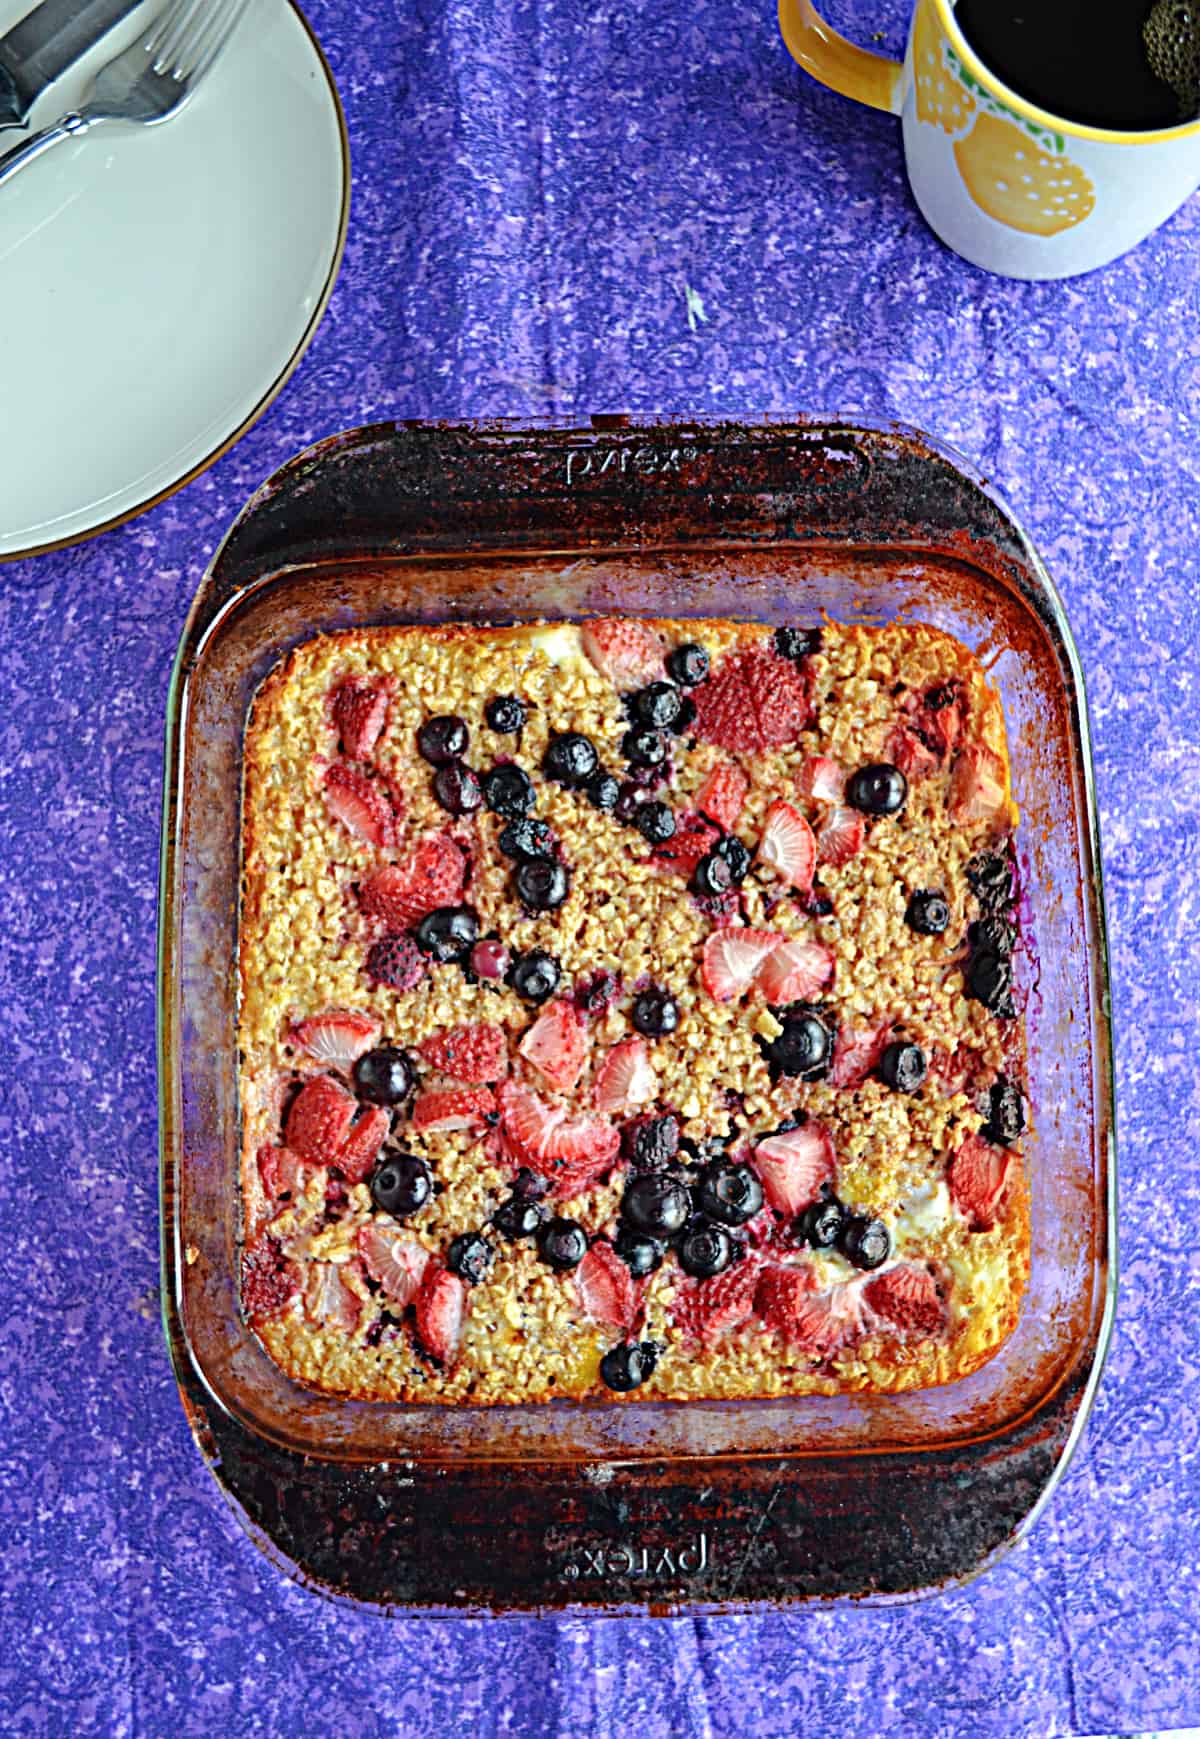 A pan of baked oatmeal topped with berries.